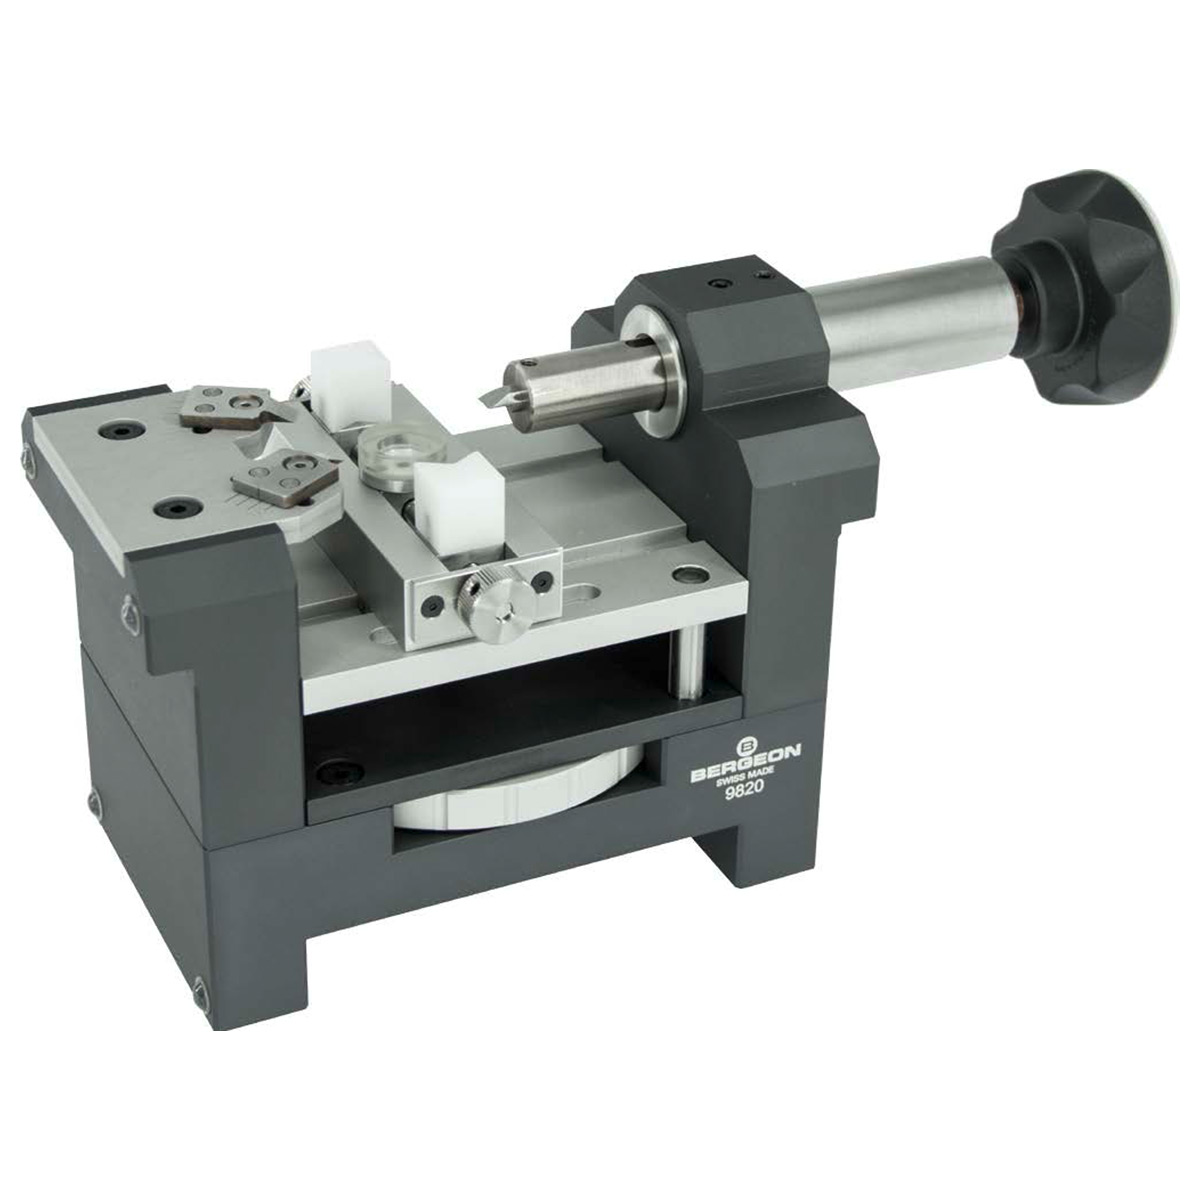 Bergeon 9820 Vise for opening pressure bottoms and bezels